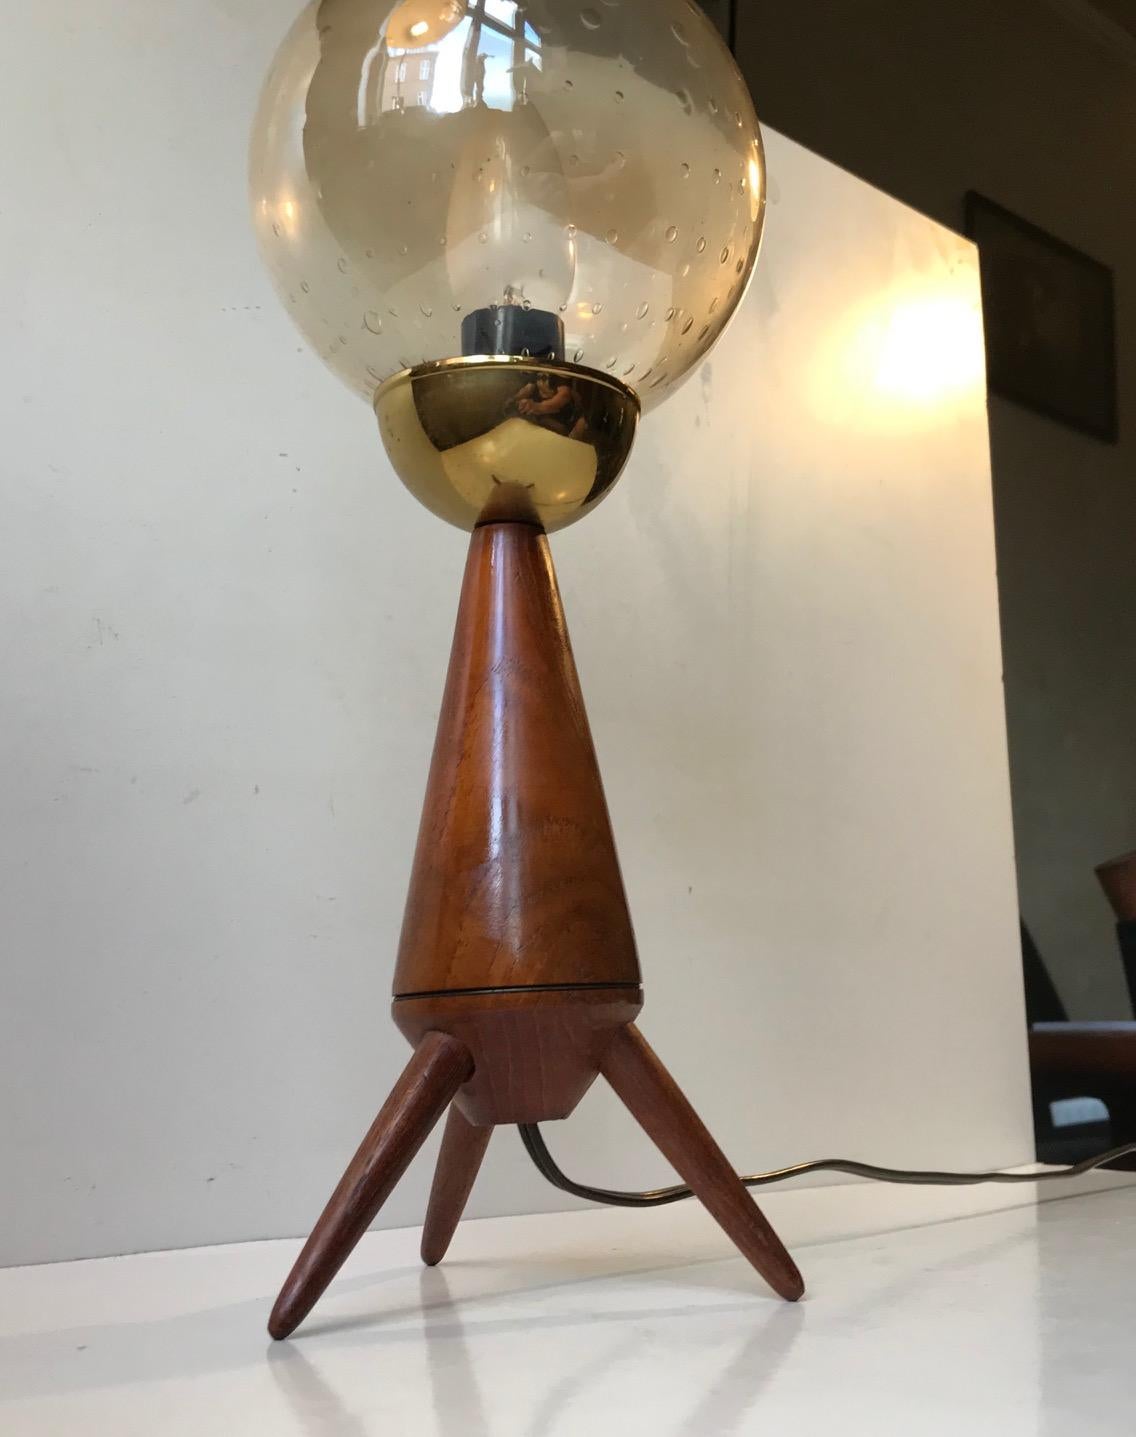 Mid-Century Modern Scandinavian Midcentury Tripod Table Lamp in Teak and Glass, 1960s For Sale